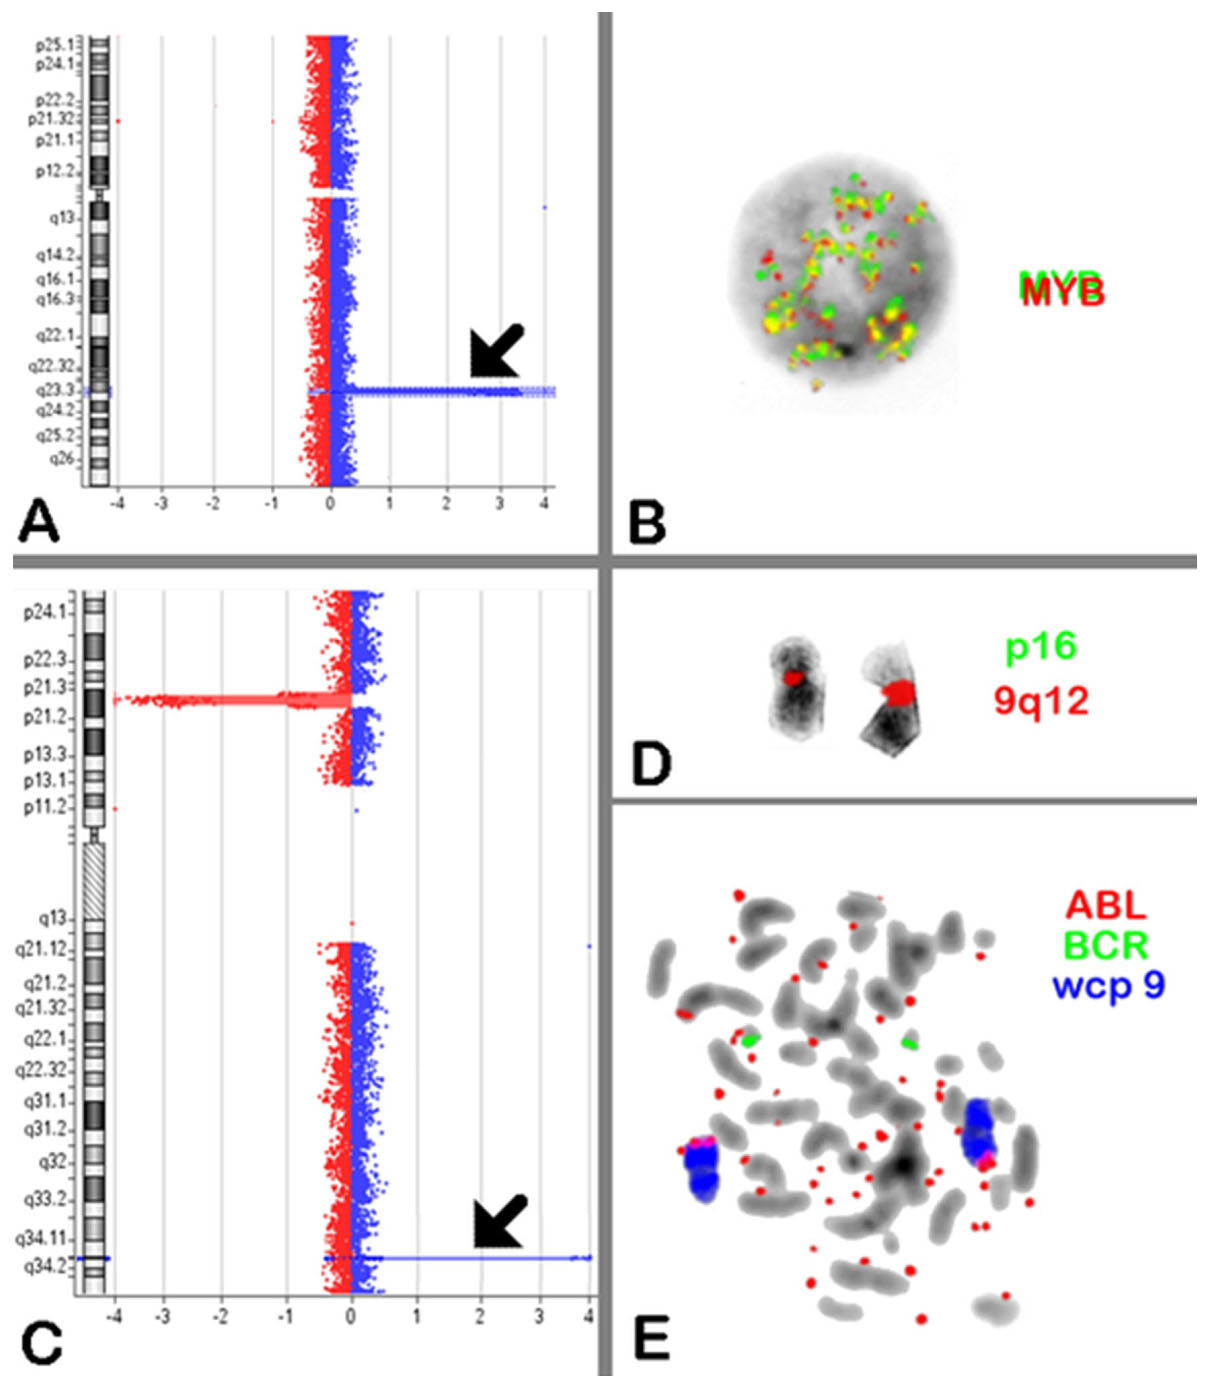 Cryptic <i>NUP214-ABL1</i> fusion with complex karyotype, episomes and intra-tumor genetic heterogeneity in a T-cell lymphoblastic lymphoma